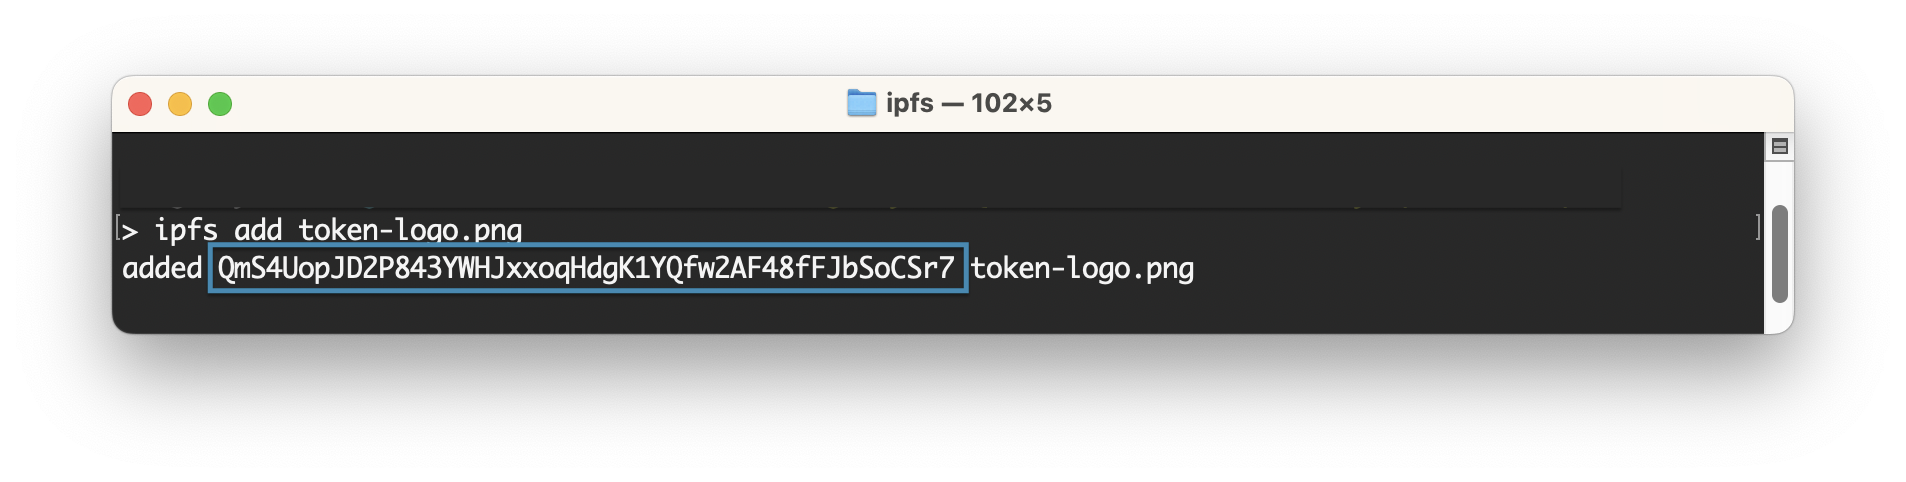 Local IPFS Output